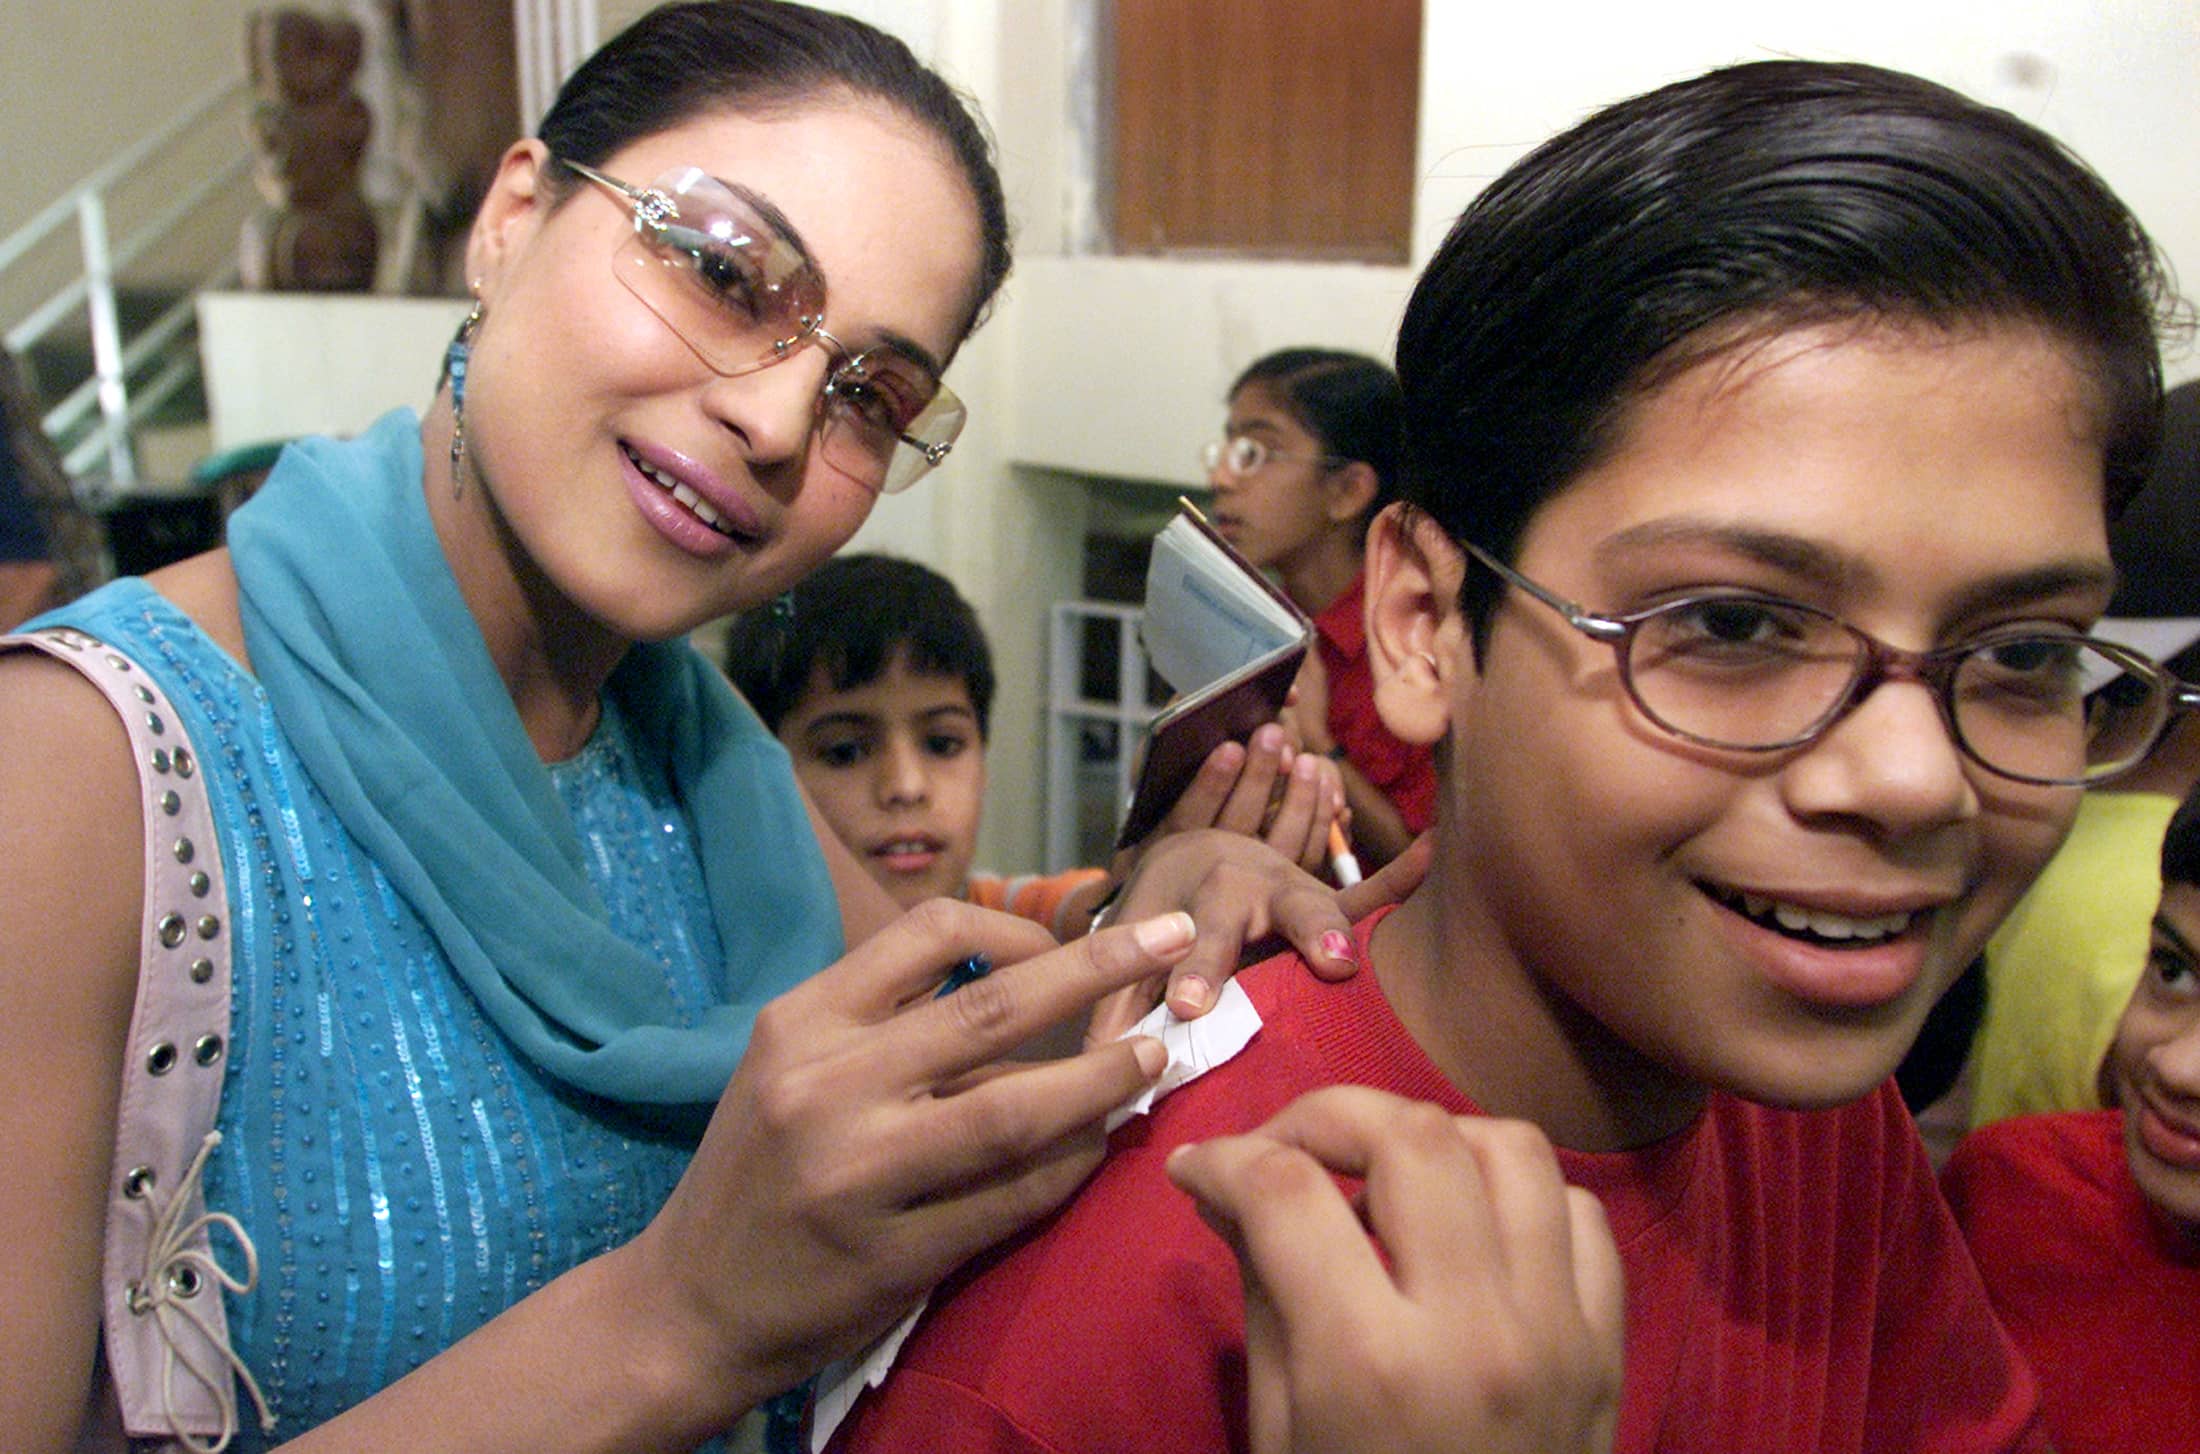 One of the accused, Pakistani actress Veena Malik, signs autographs for Indian school children in Chandigarh, India, 27 May 2004, REUTERS/Ajay Verma